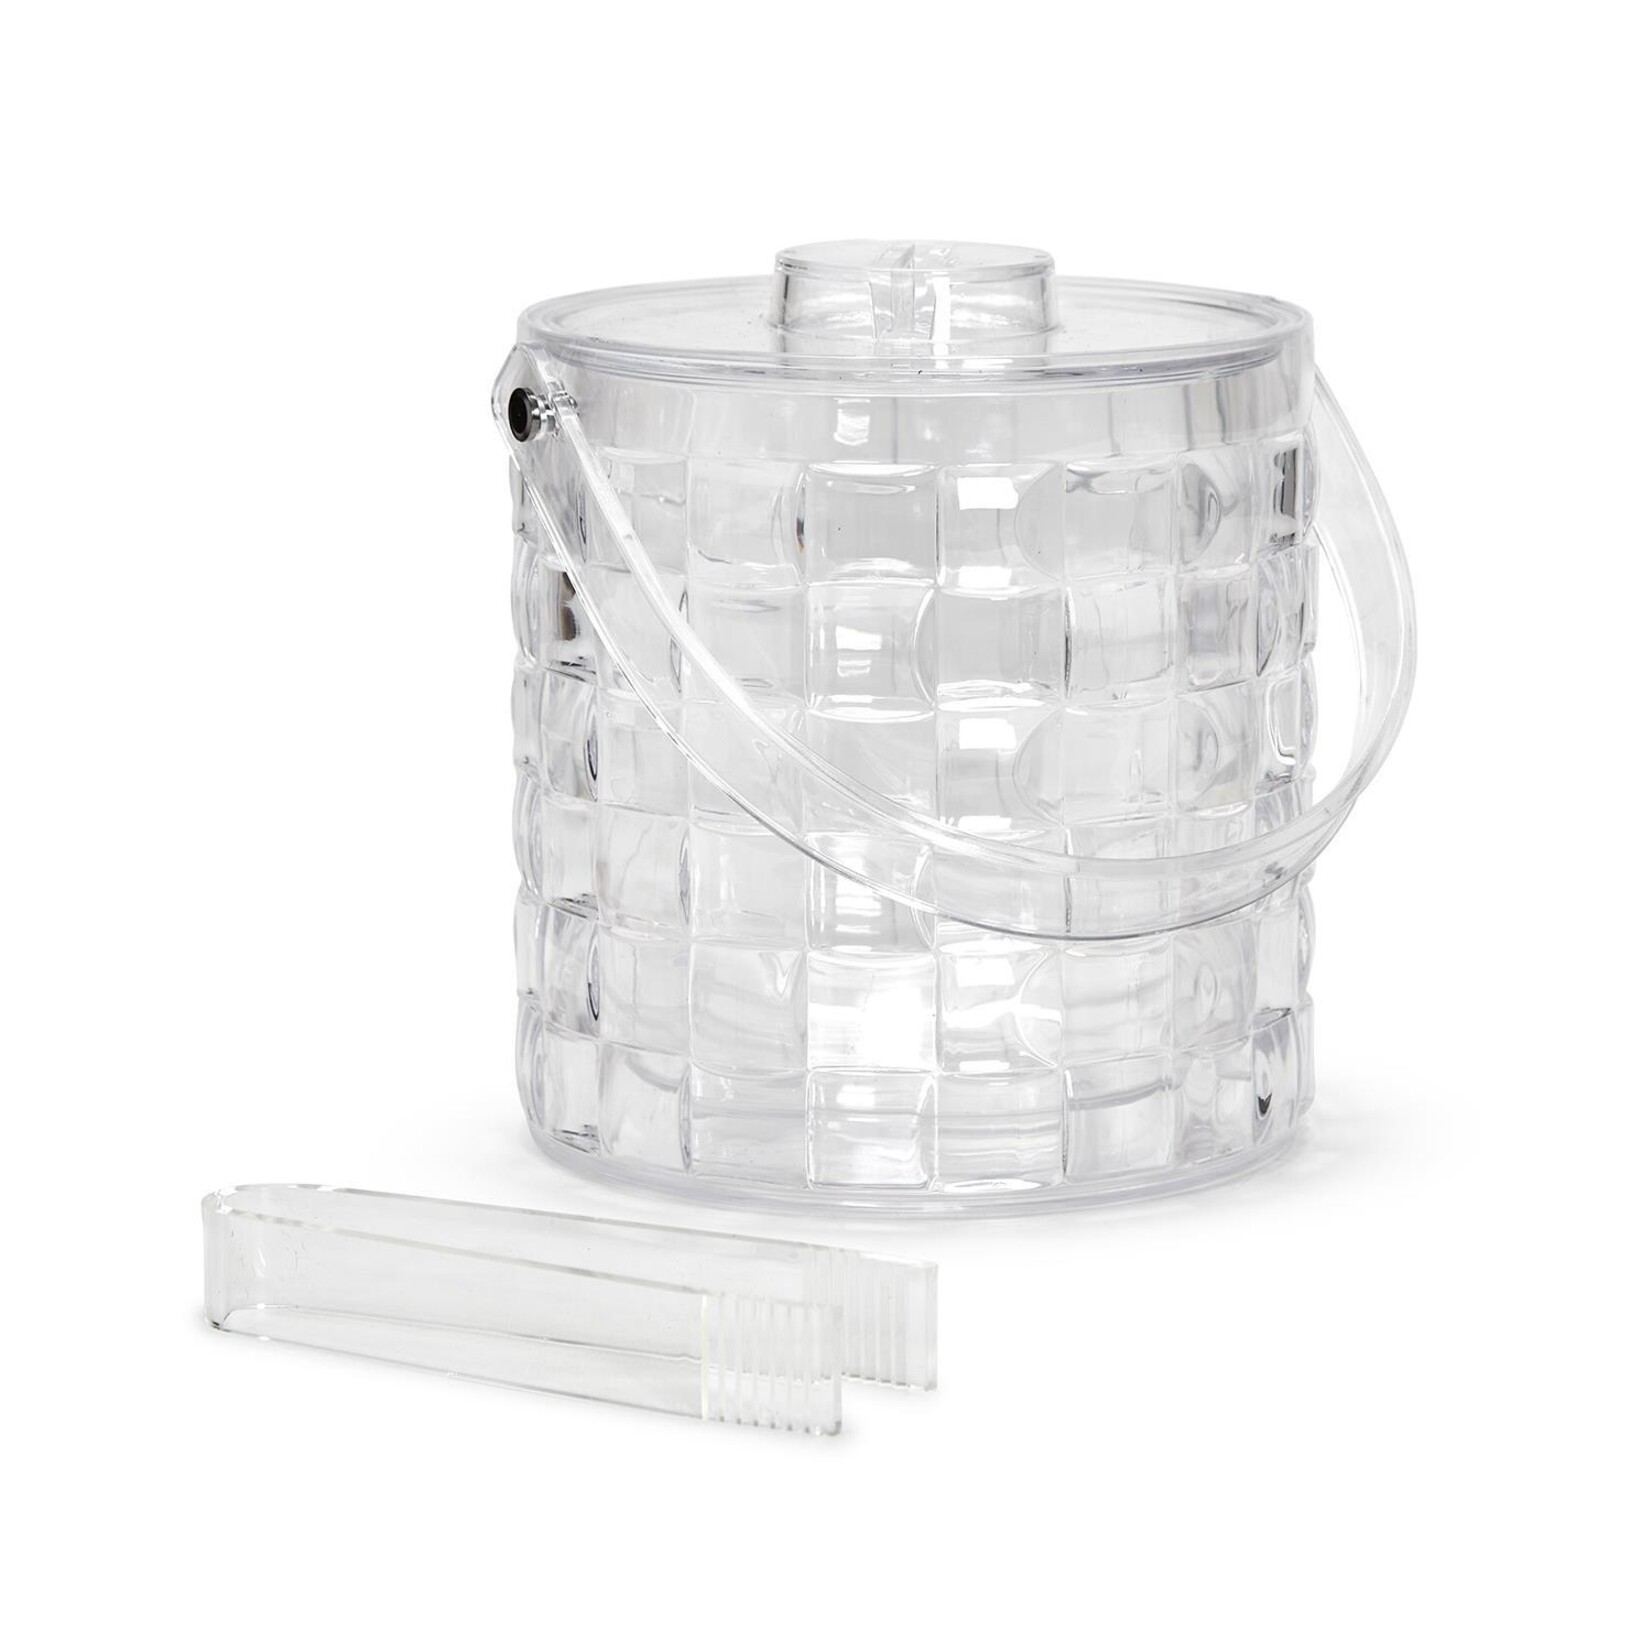 Two's Company Cubed Double Wall Ice Bucket with Tongs